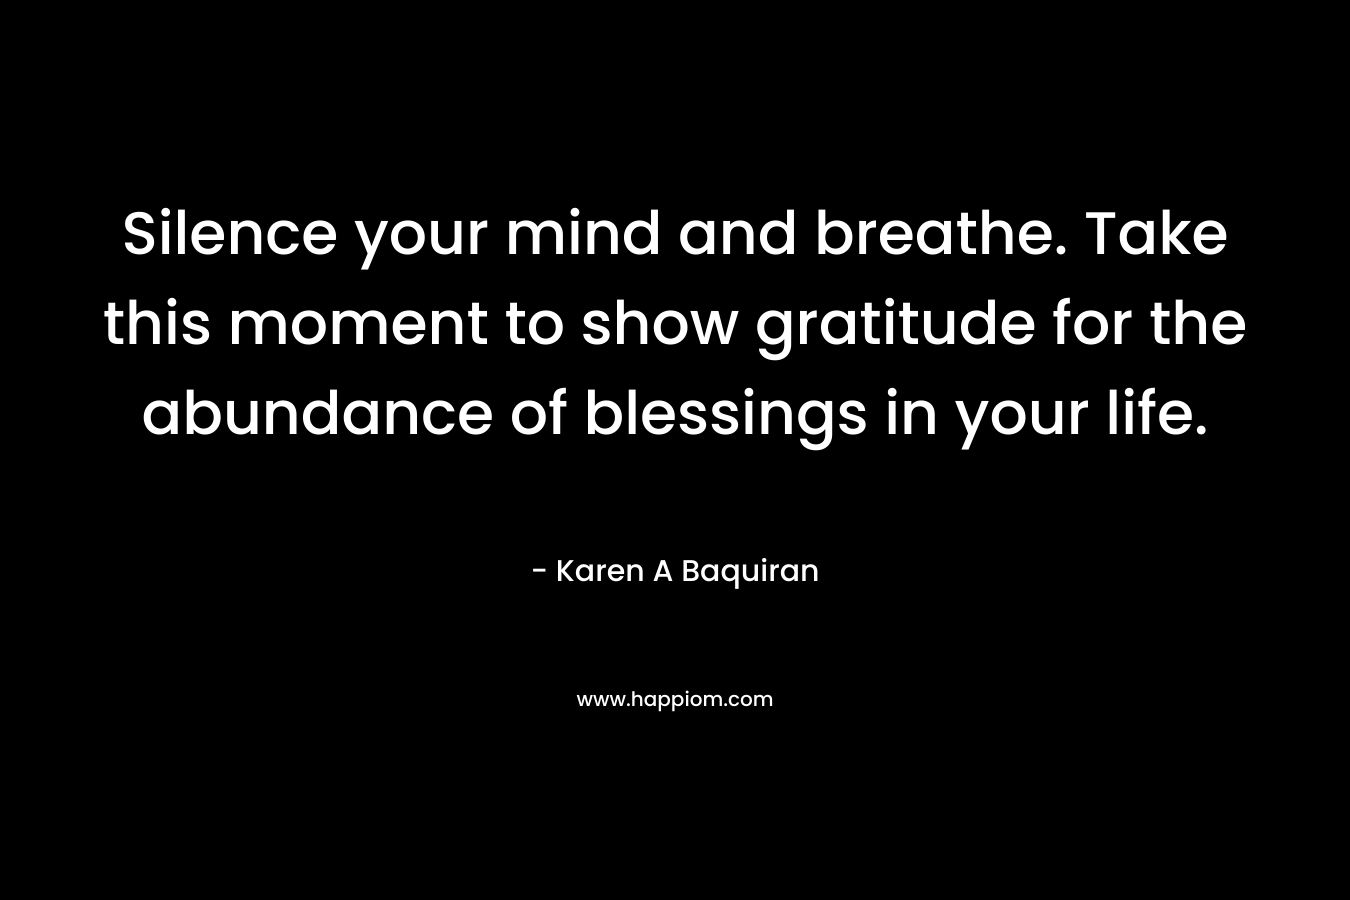 Silence your mind and breathe. Take this moment to show gratitude for the abundance of blessings in your life.